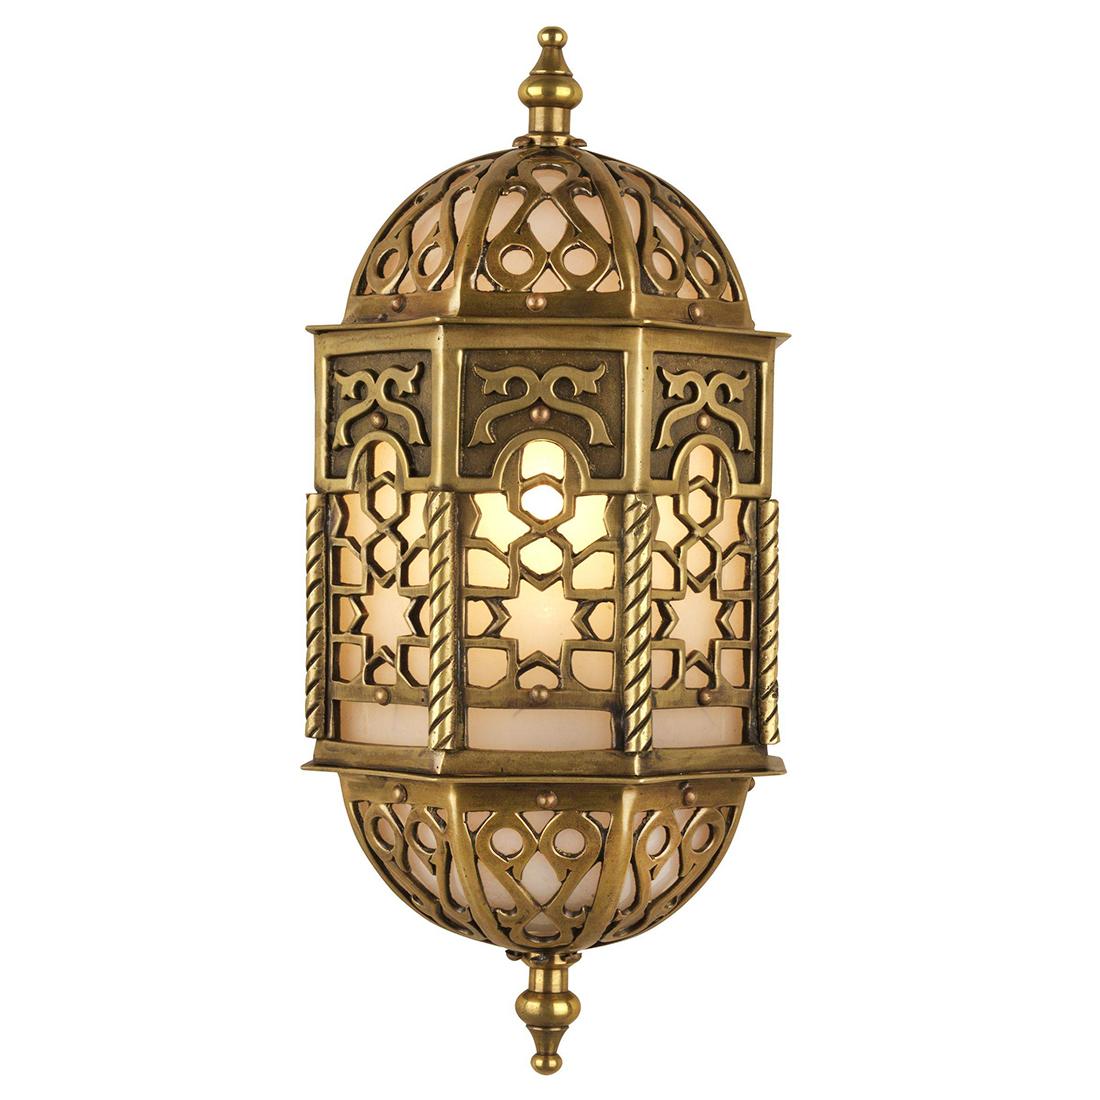 Wall lamp Djerba with structure in
brass in vintage finish. With 1 bulb,
lamp holder type E14, max 40 watts.
Bulb not included.